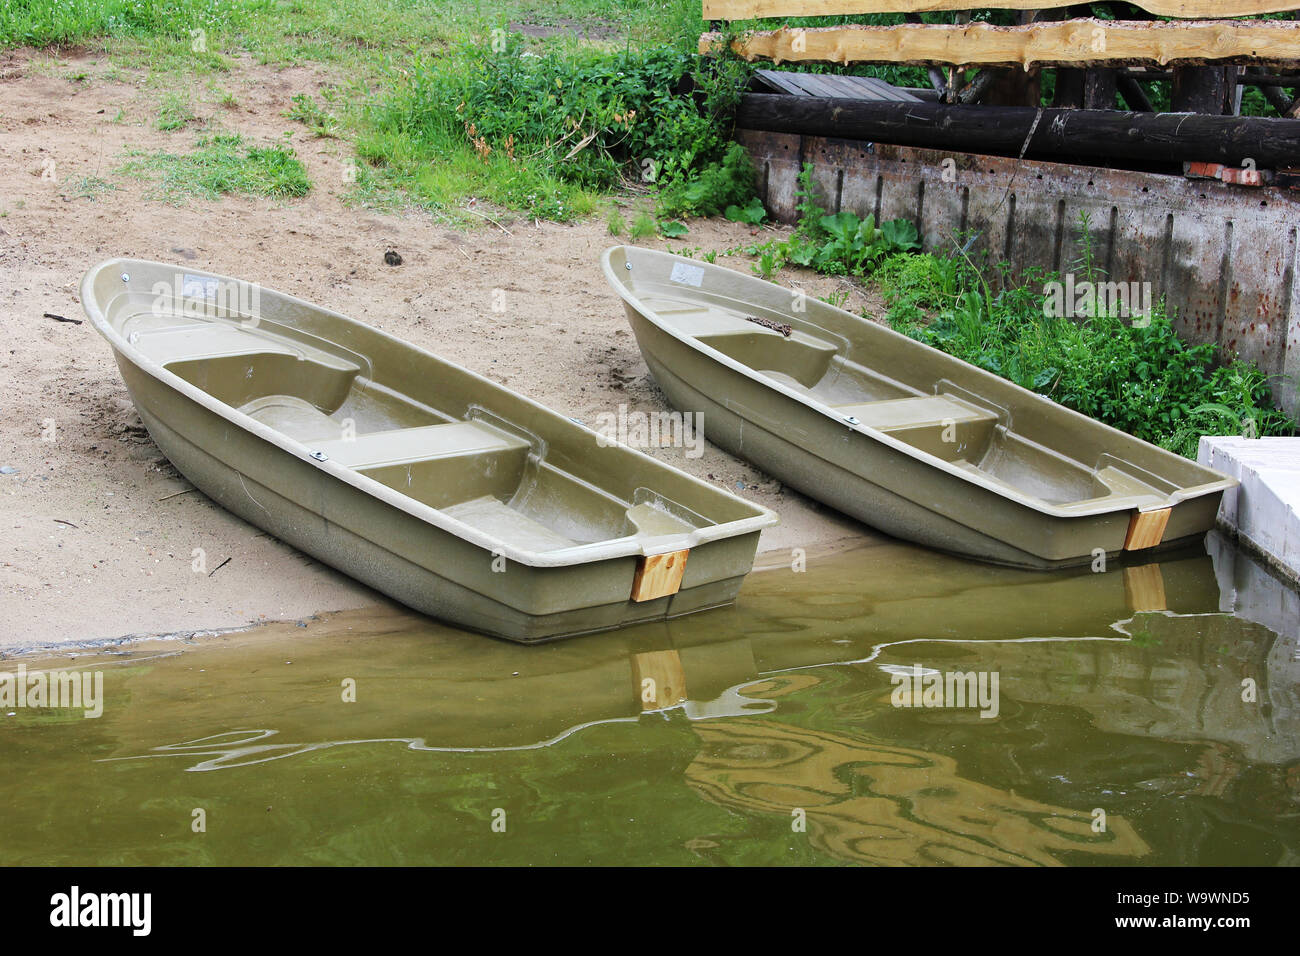 https://c8.alamy.com/comp/W9WND5/two-plastic-boats-on-the-banks-of-the-river-istra-summer-fishing-vacation-on-the-river-W9WND5.jpg